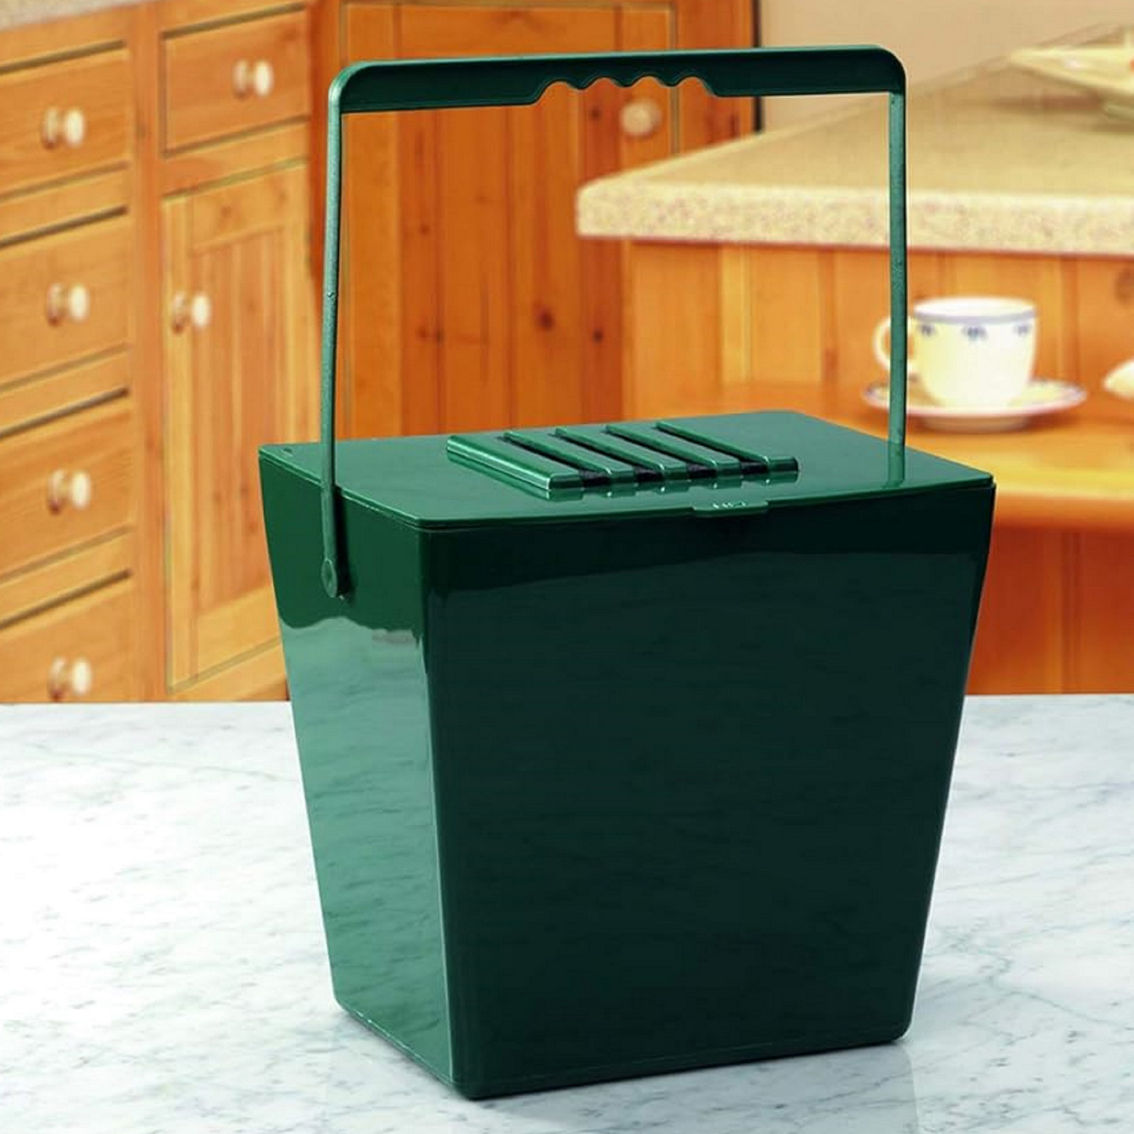 Bosmere English Garden 1.3 gal. Odor Free Plastic Kitchen Compost Caddy with Lid - Image 2 of 3